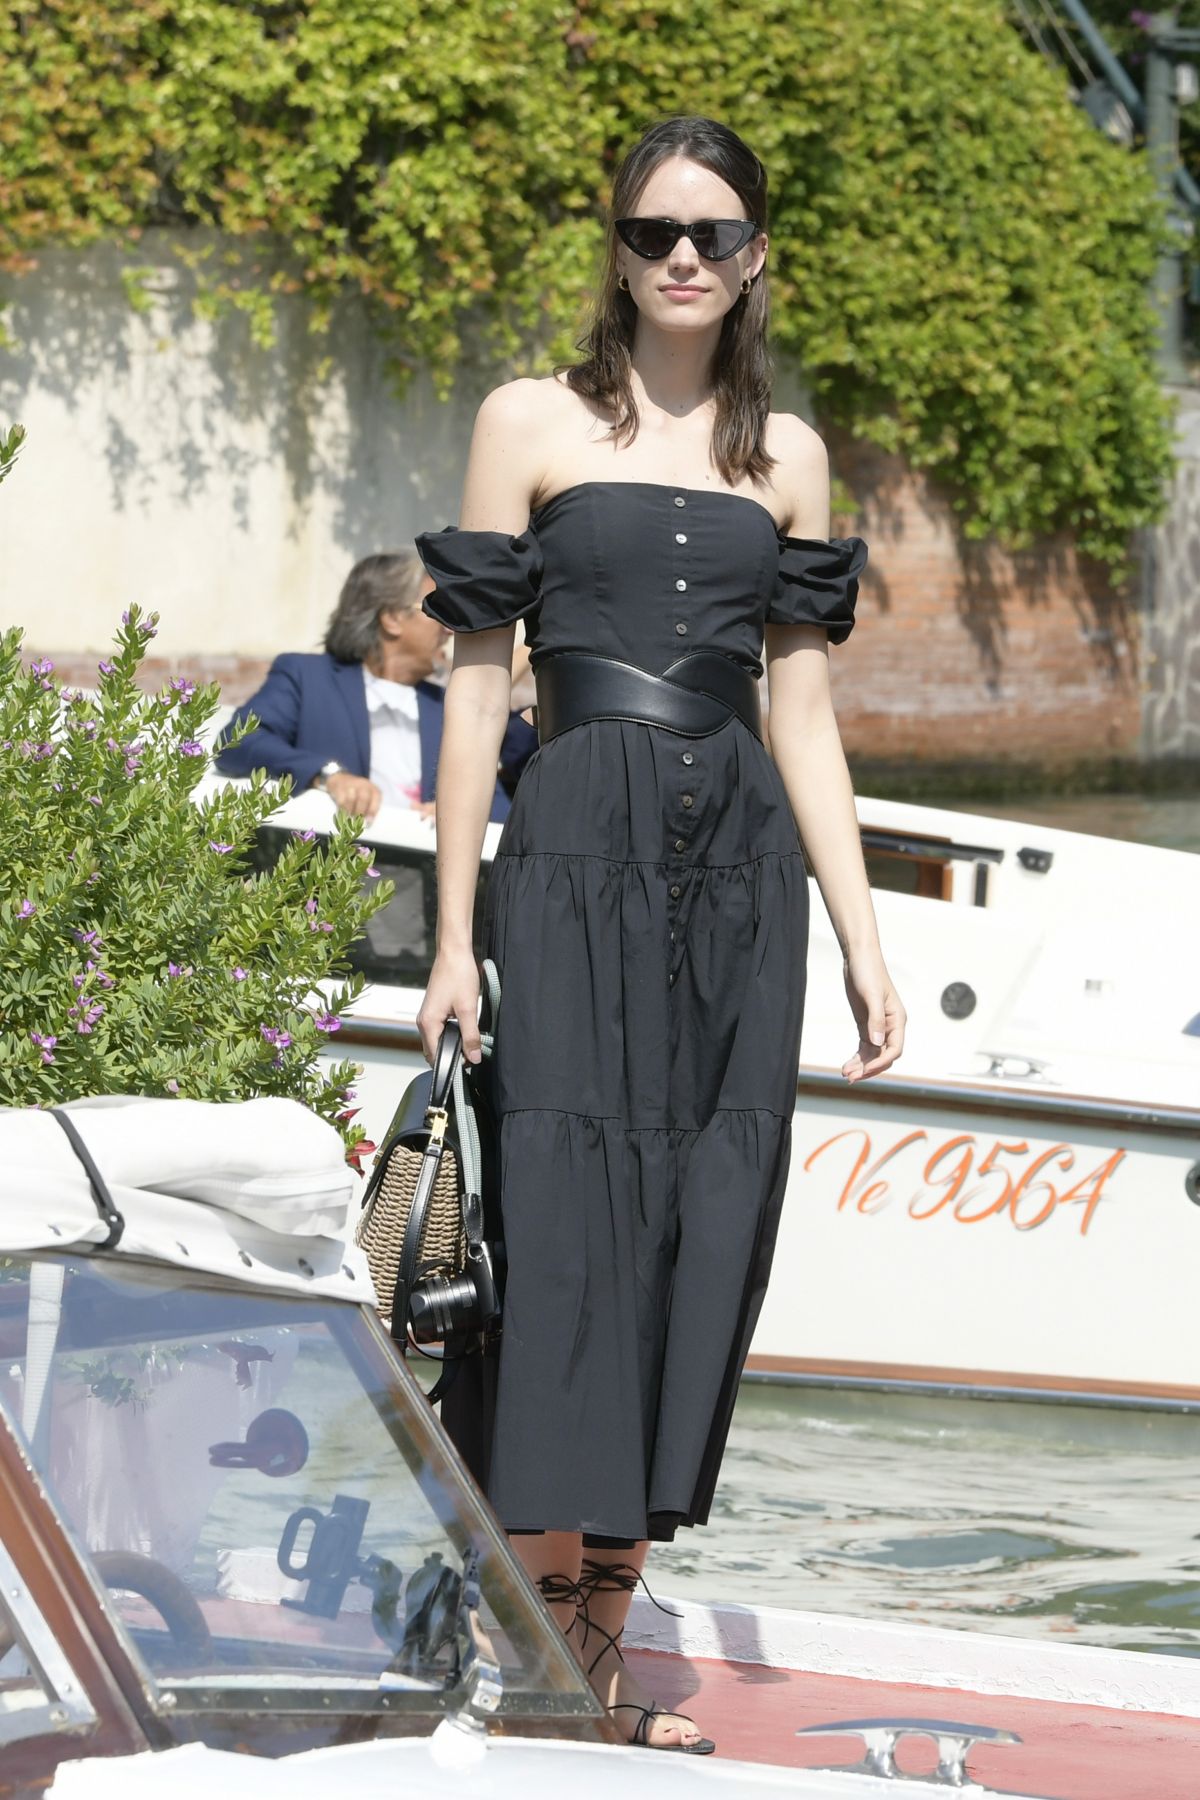 STACY MARTIN Arrives at Lido in Venice 09/07/2019 – HawtCelebs